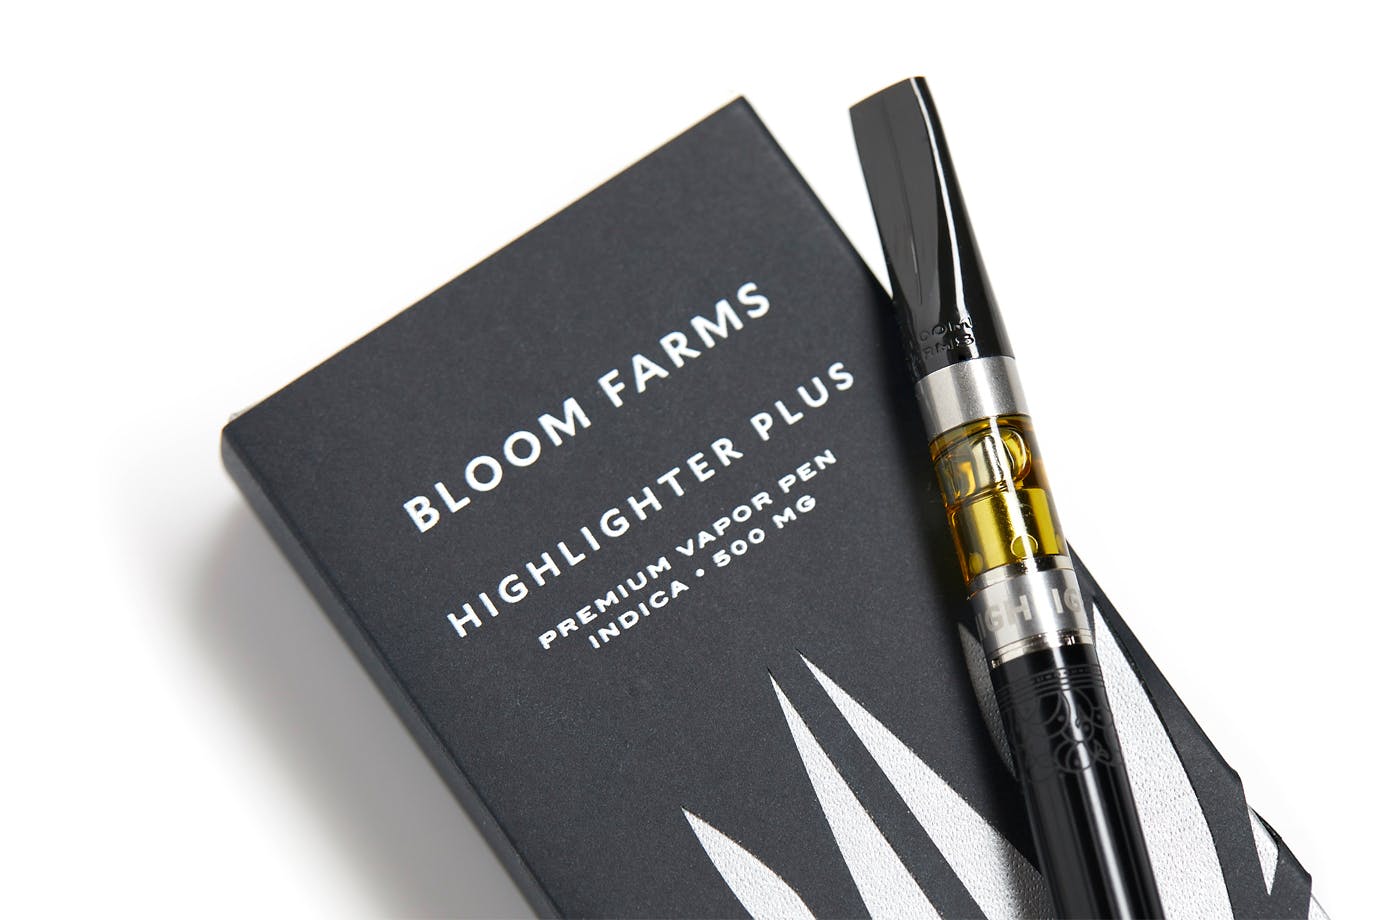 concentrate-bloom-farms-highlighter-indica-5g-vape-pen-kit